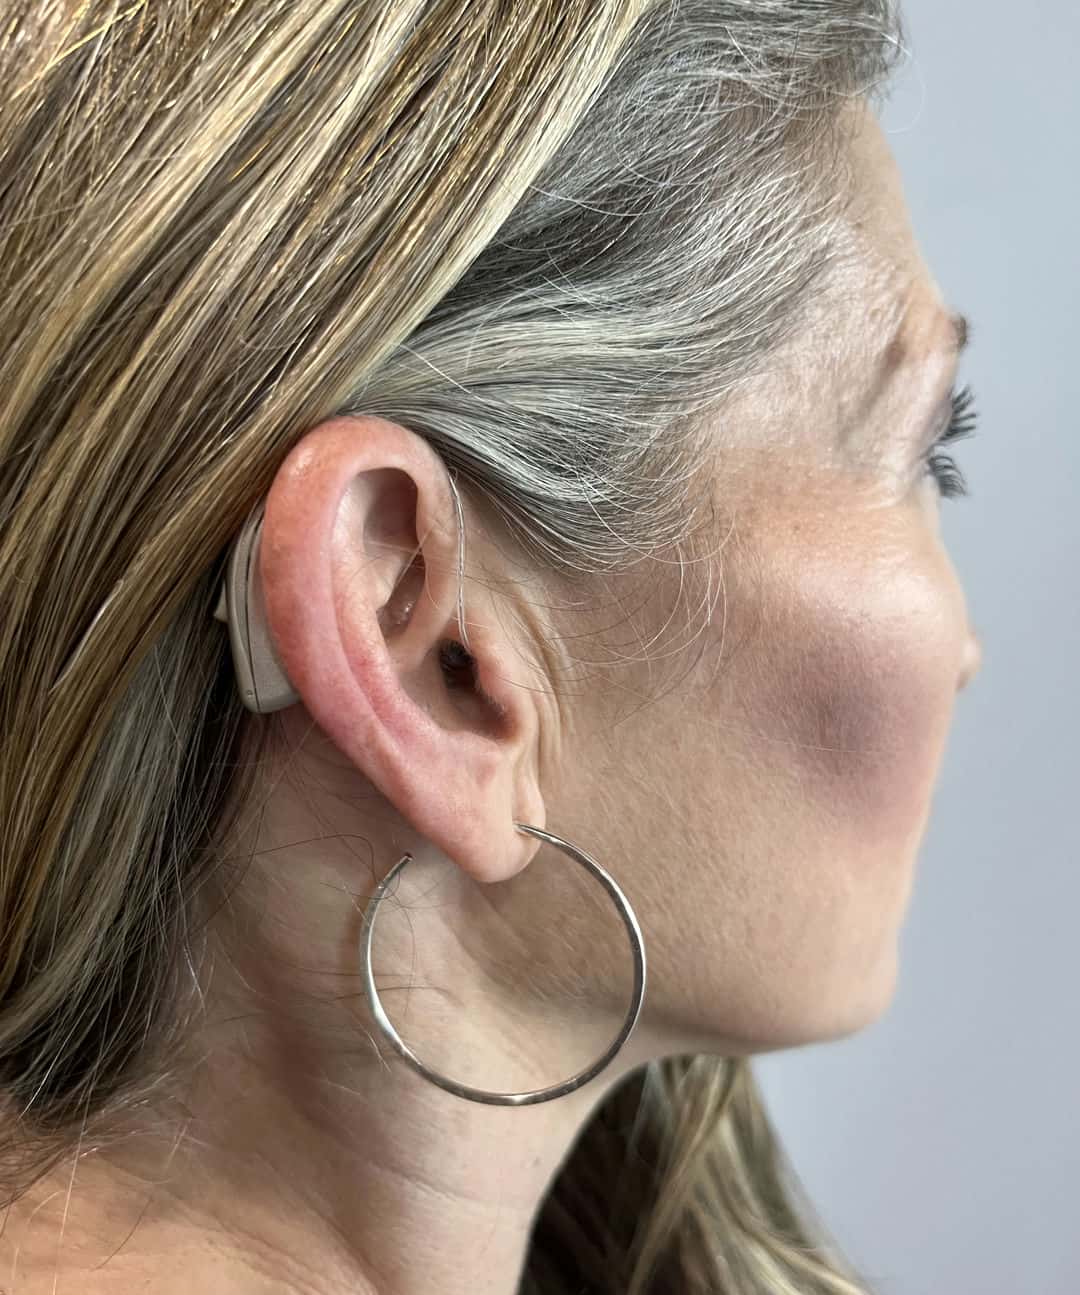 behind the ear hearing aid being worn by a woman